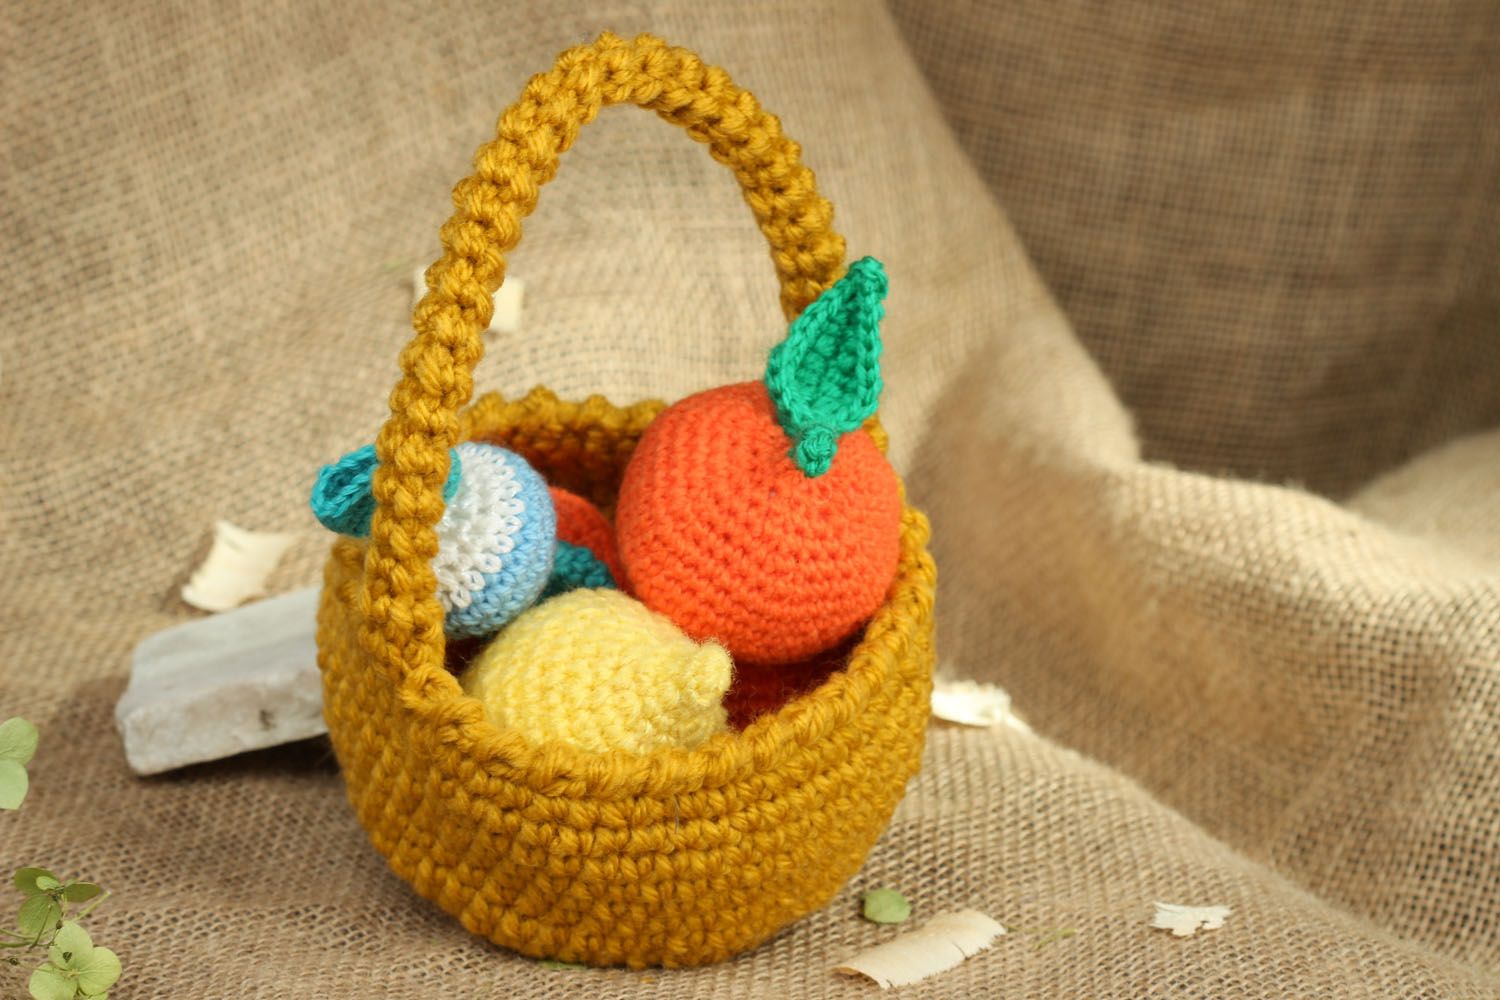 Crochet toy Basket with Fruit photo 5